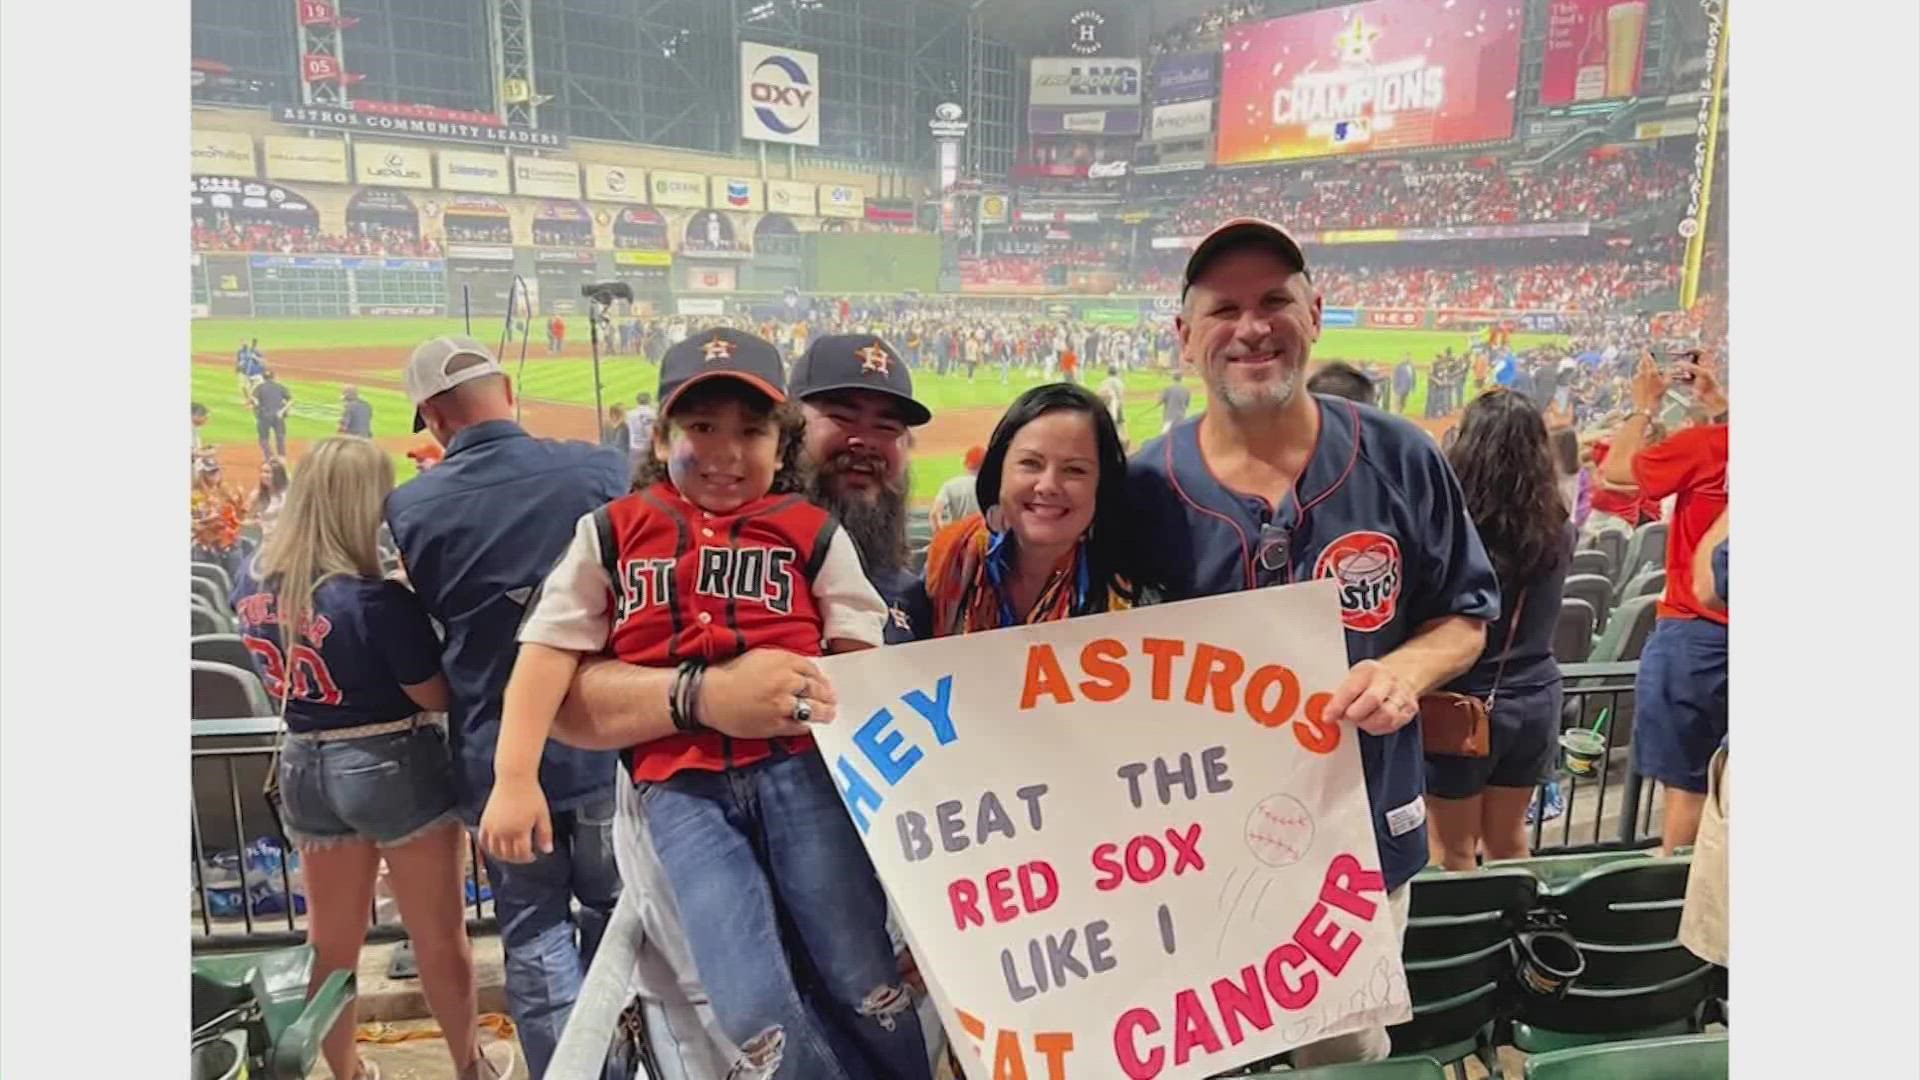 After beating cancer, Judah, 4, has this message for the 'Stros